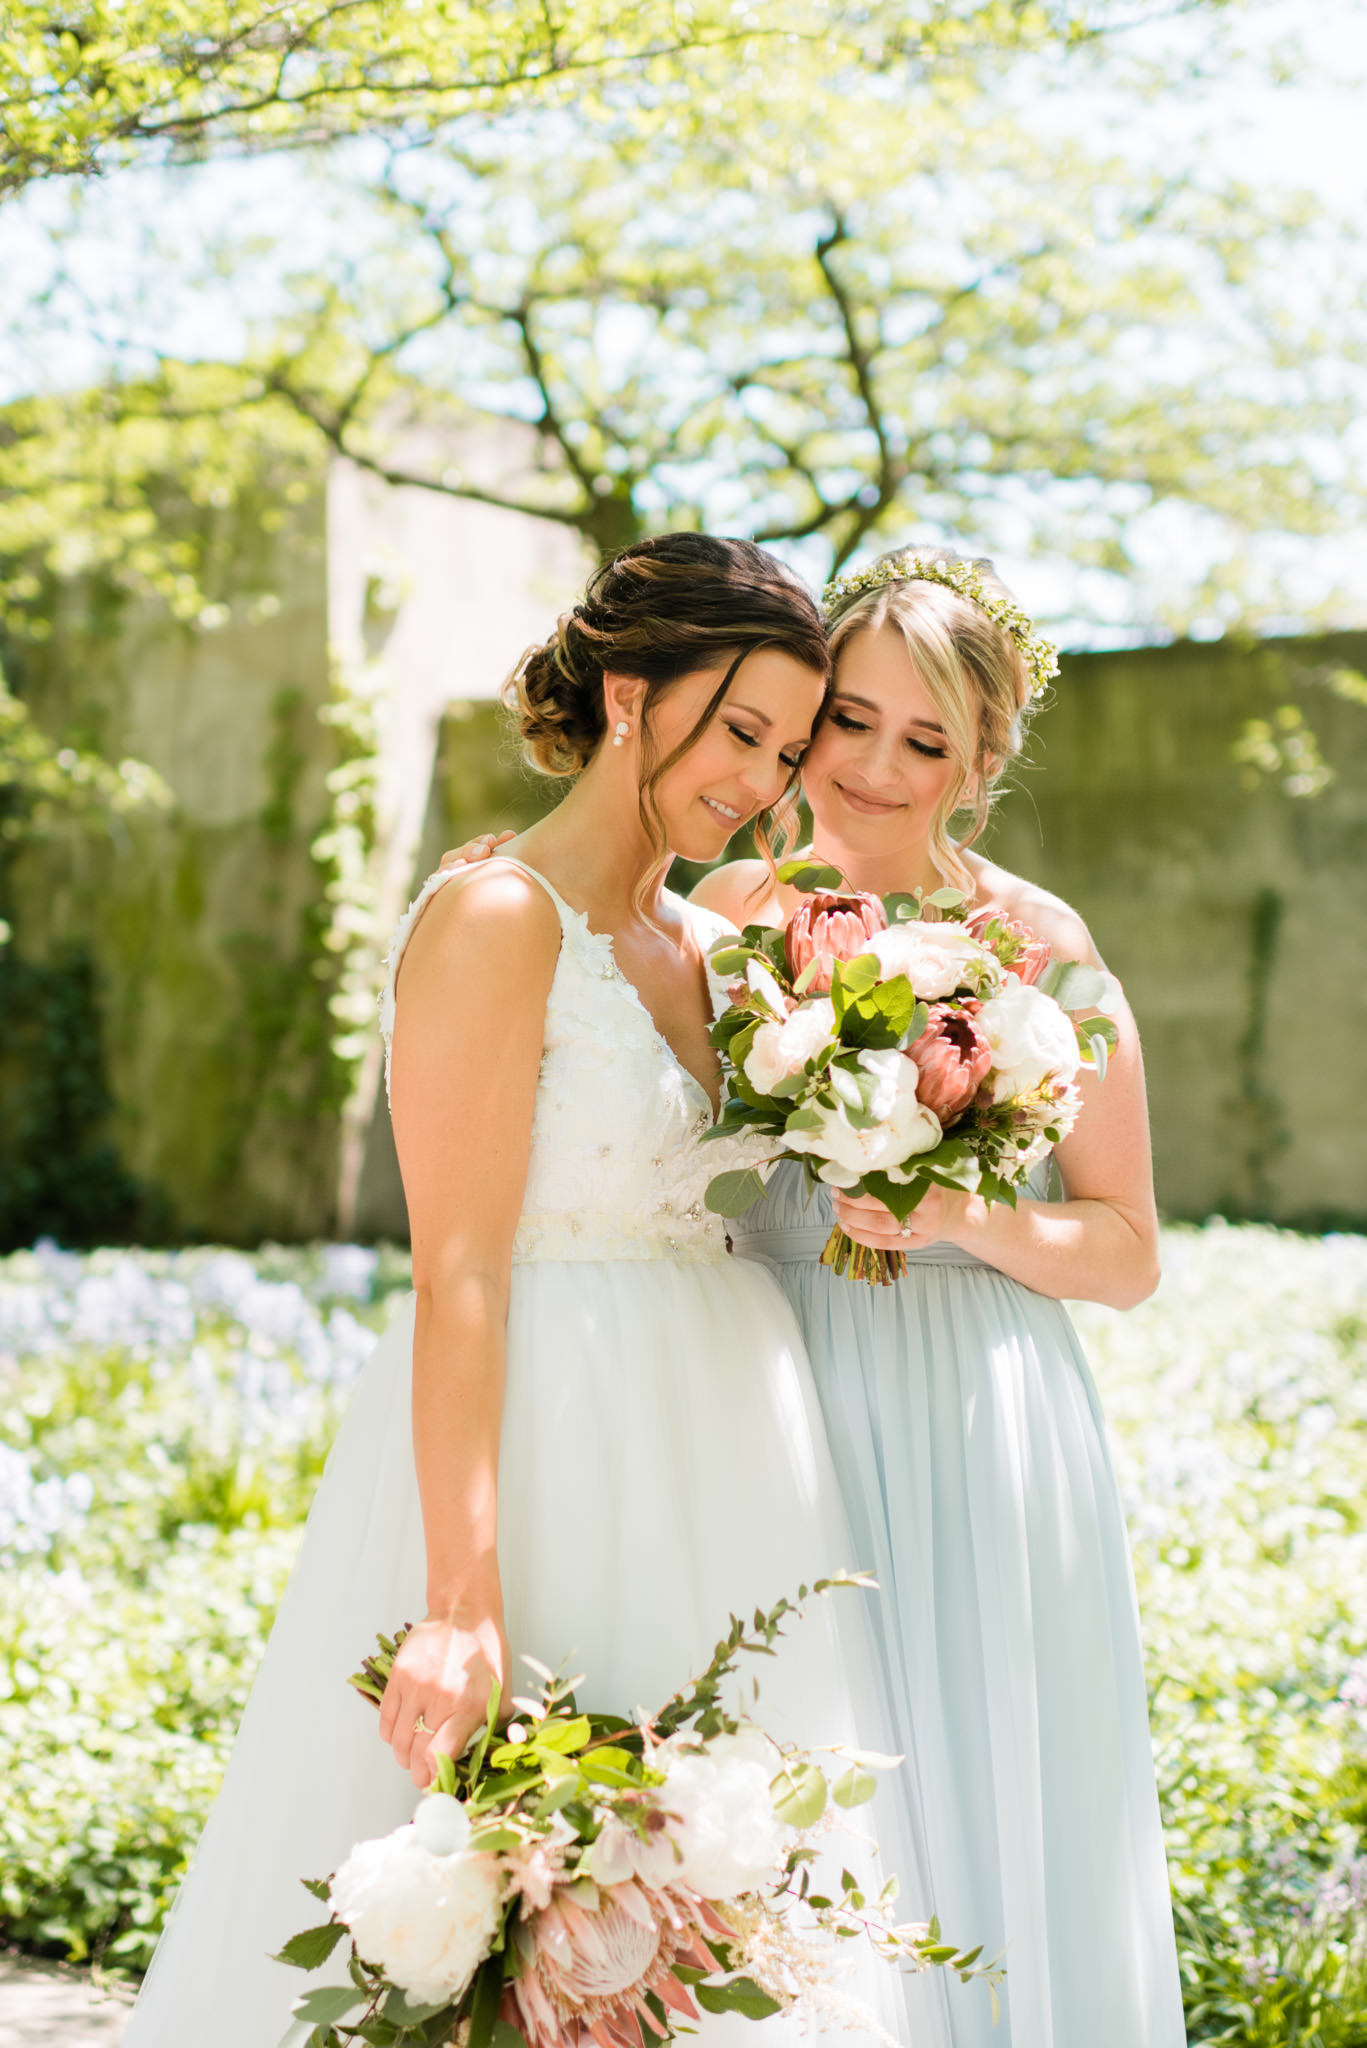 Bride and bridesmaid in garden for spring wedding, with bouquets of blush protea, white anemone, pale pink astilbe, and ivory peonies.